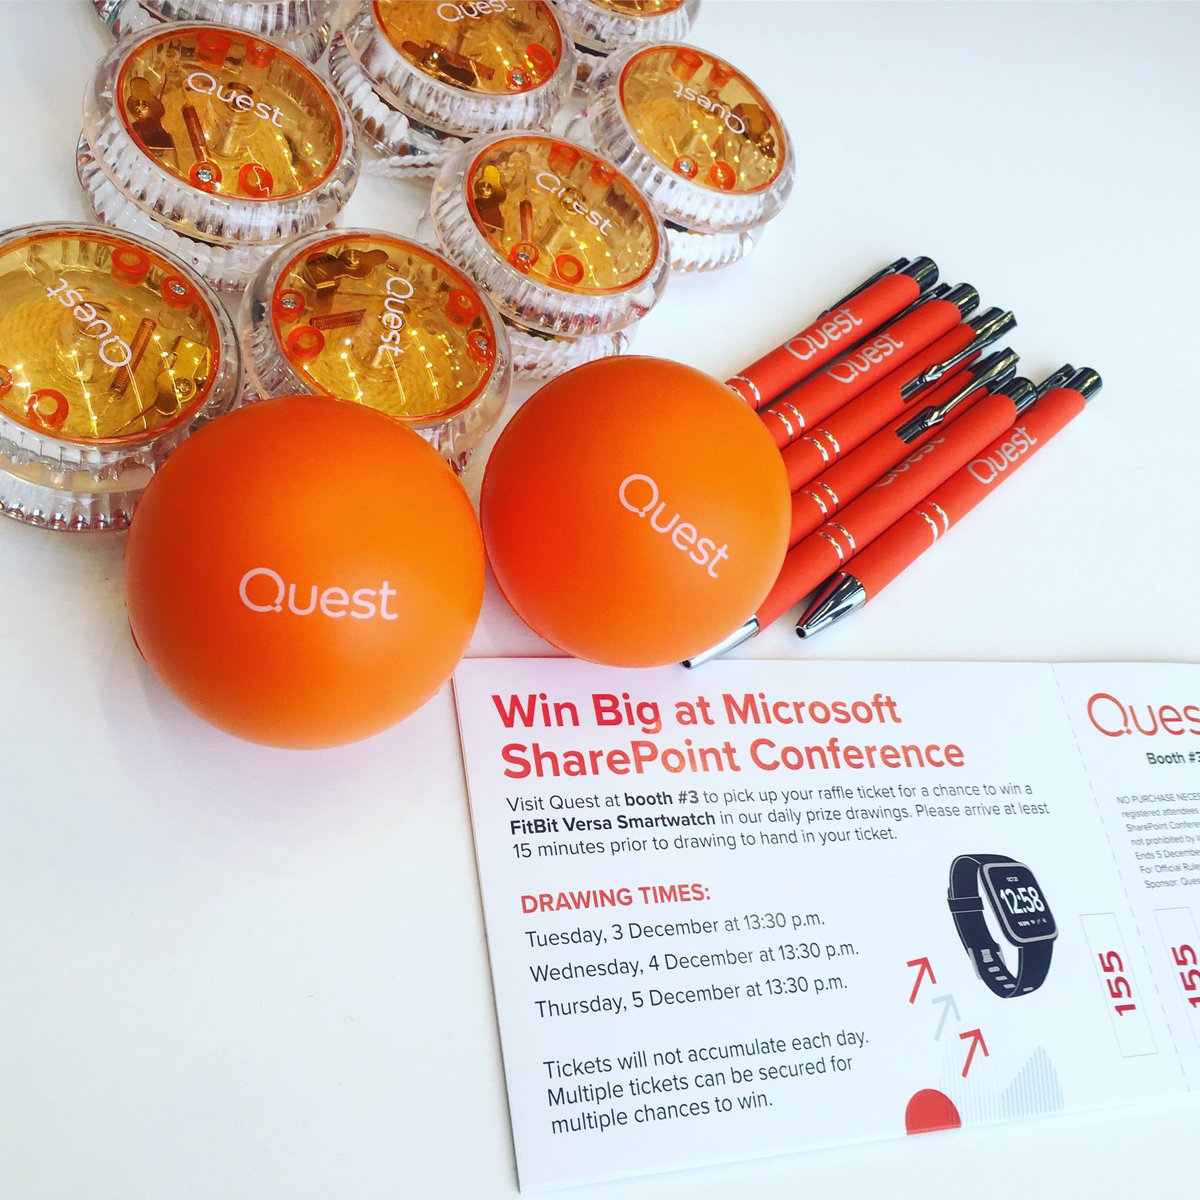 Visit the @Quest_EMEA booth at #ESPC19 #Prague, grab cool gifts and win a nice @fitbit Versa Smartwatch 😎🏃‍♀️⛷#wearequest @Quest